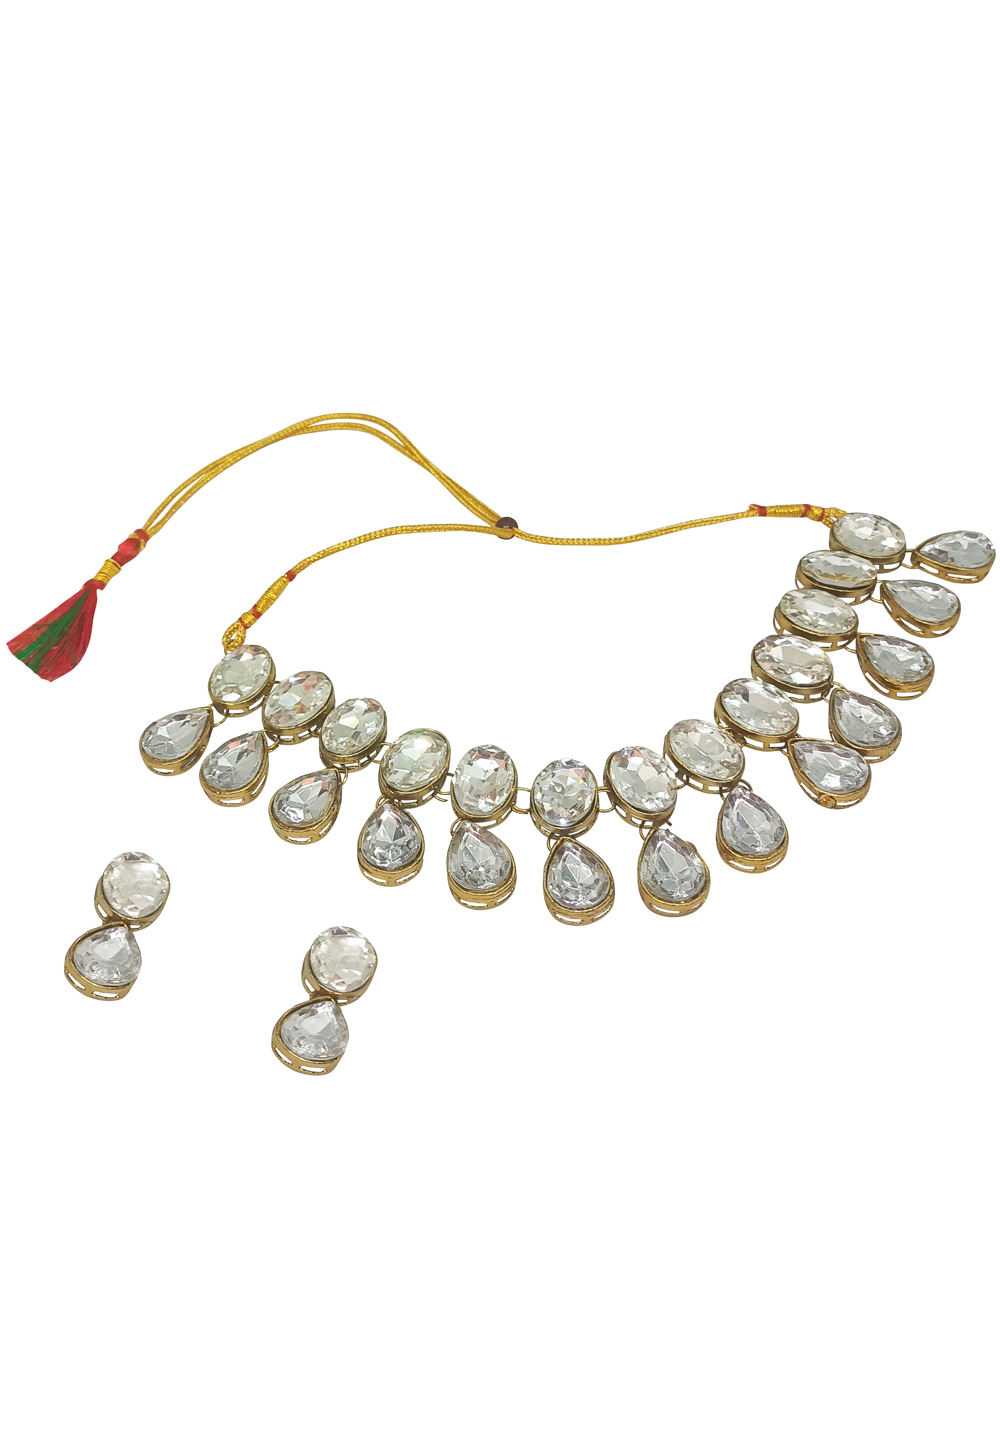 Off White Alloy Austrian Diamonds And Kundan Necklace Set With Earrings 269243